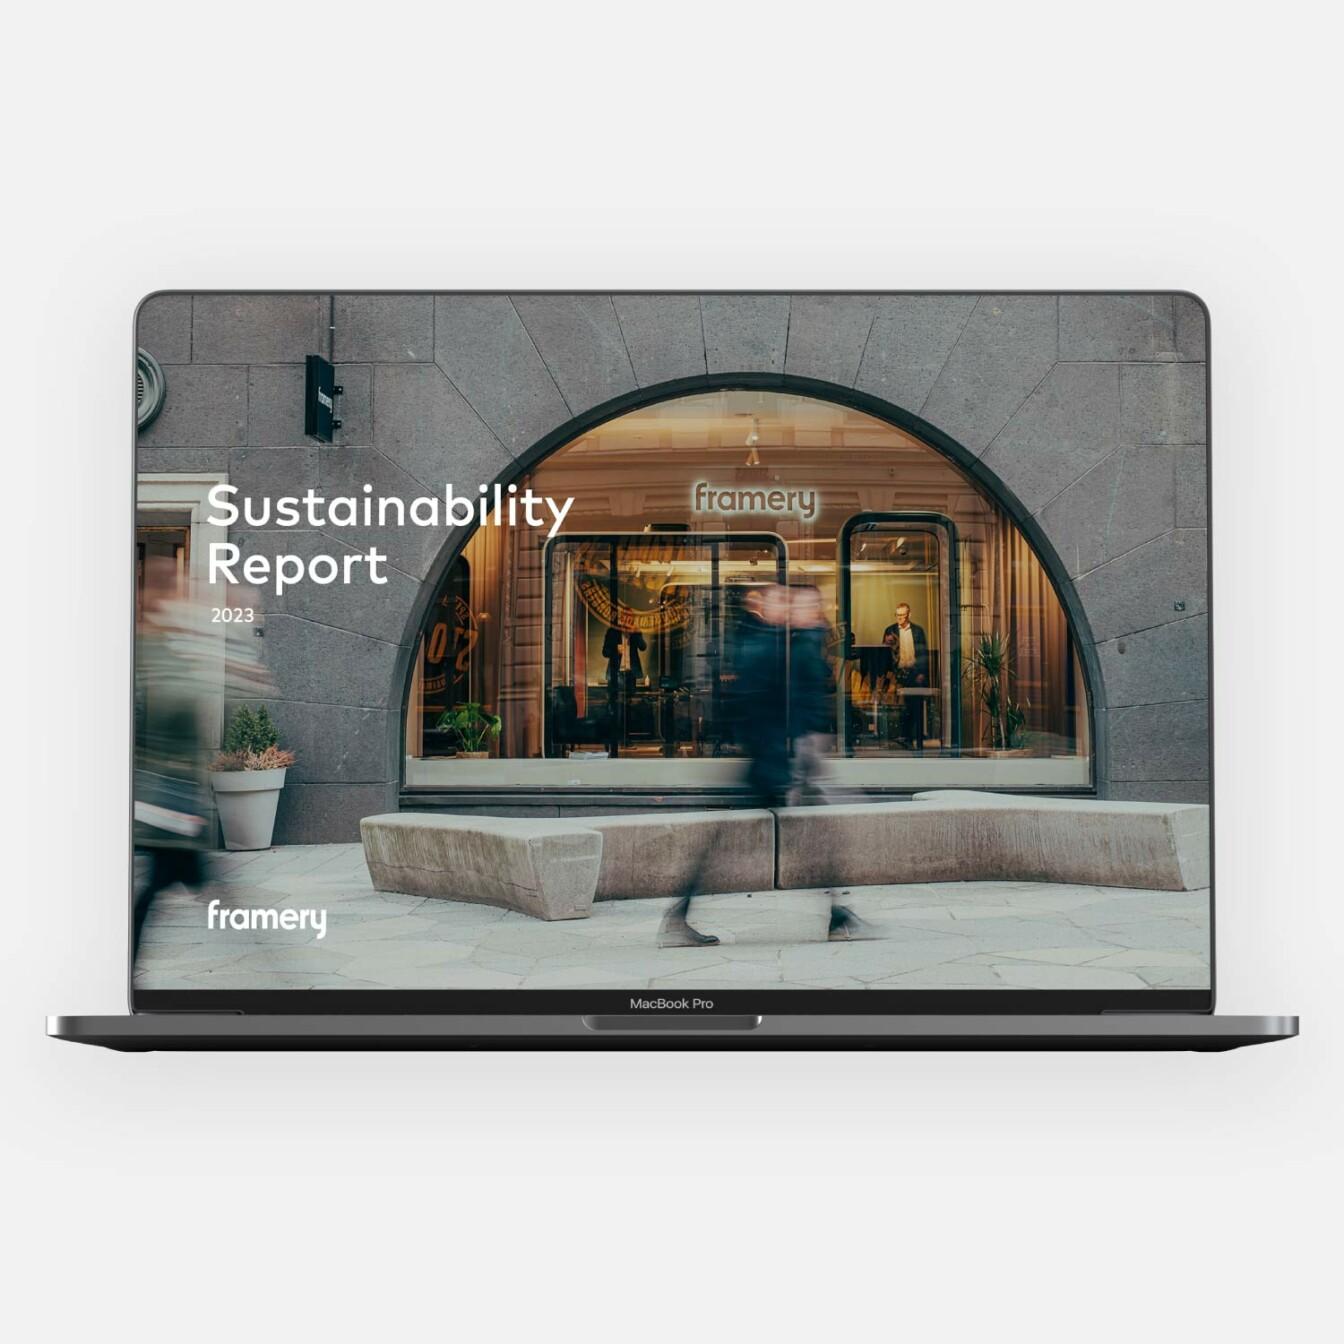 Framery 2023 Sustainability Report on a laptop screen.